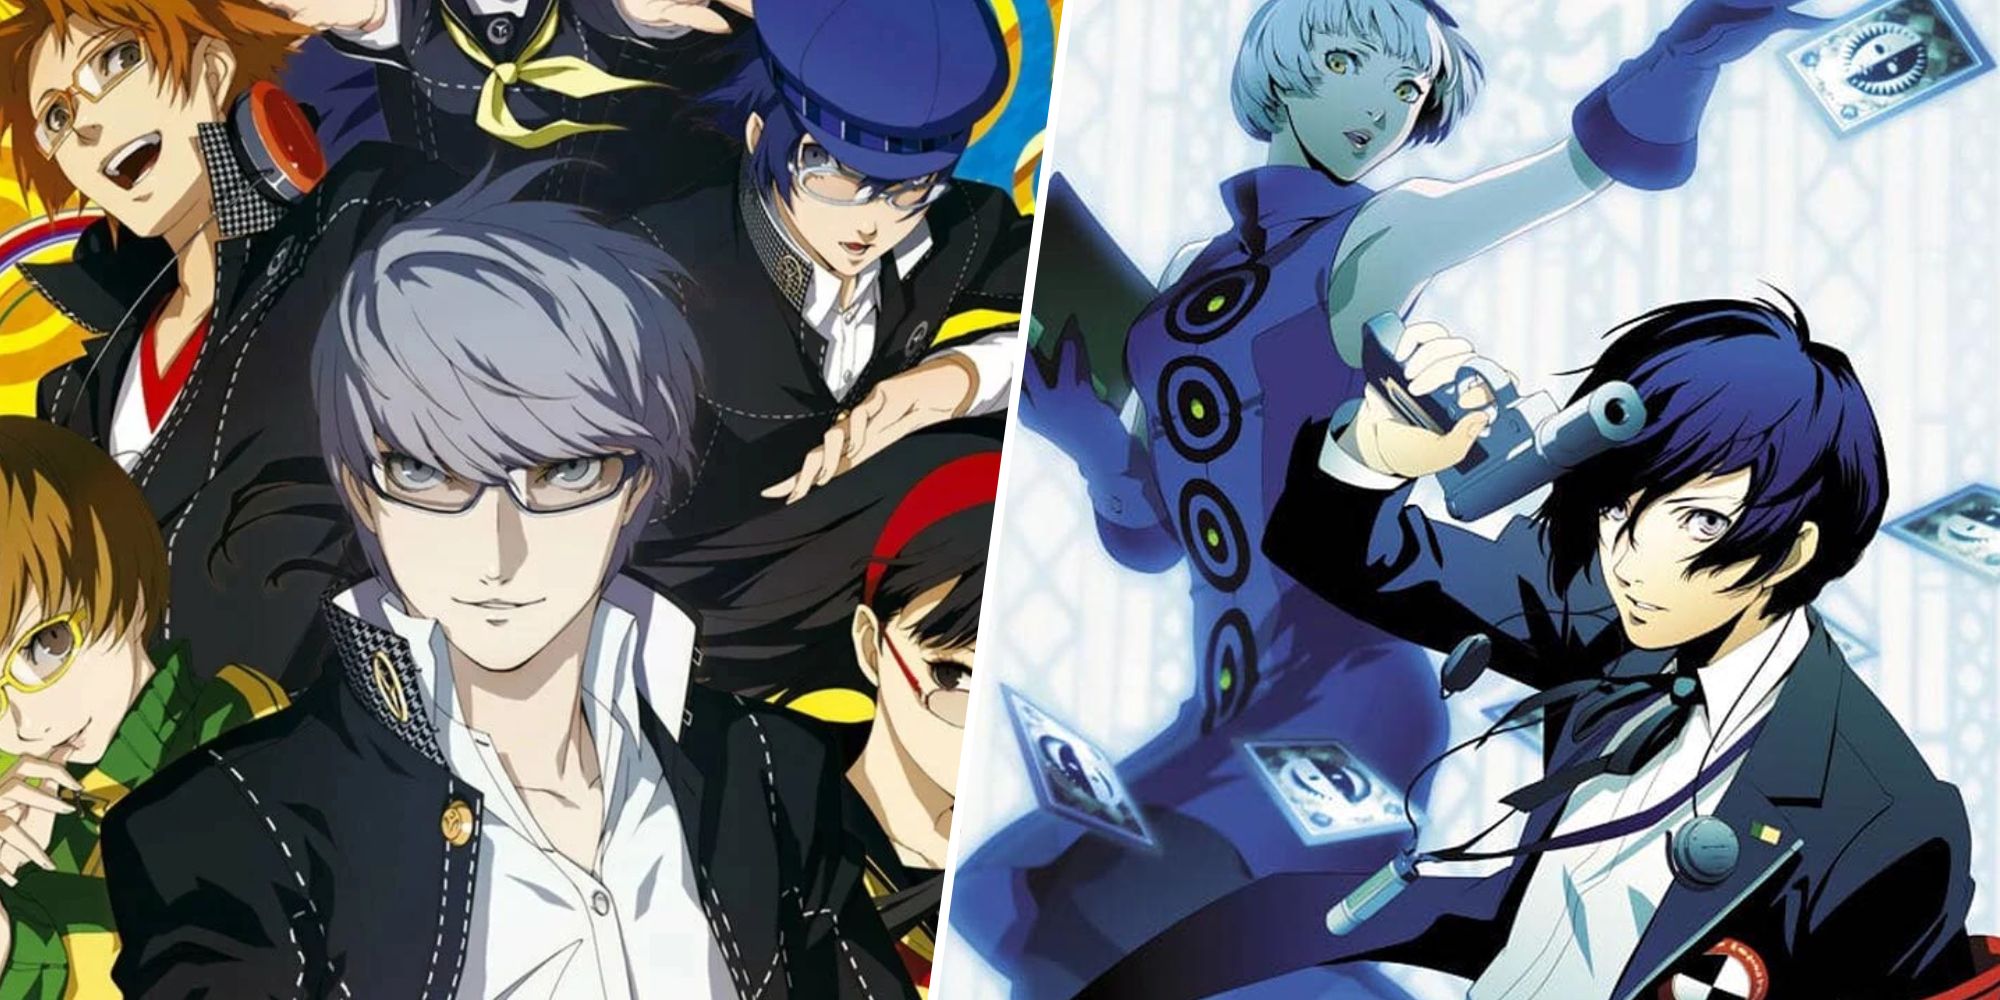 Personnages Persona 4 et Persona 3